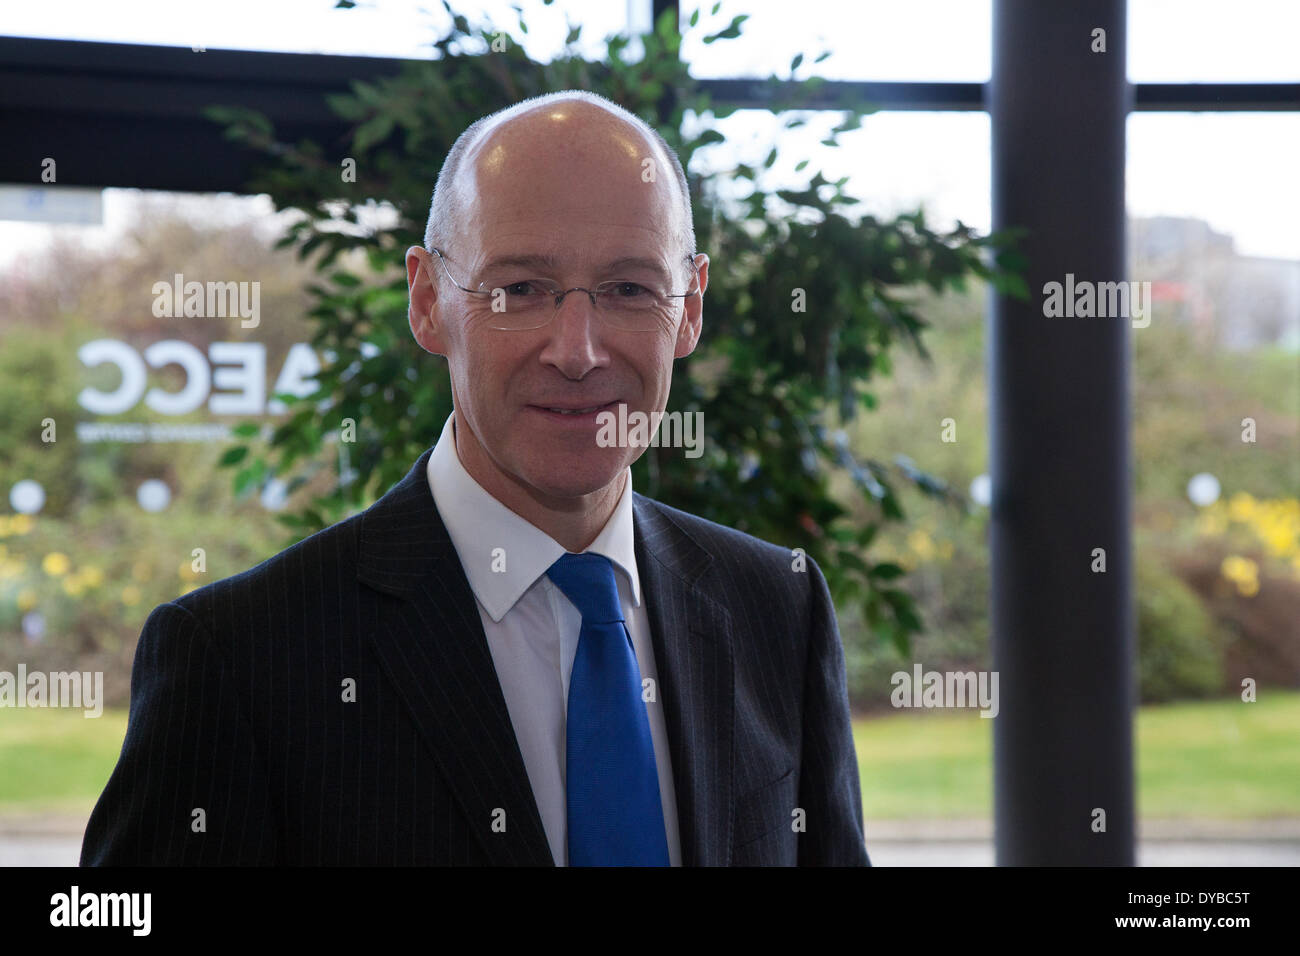 Mr John Swinney speaking at the SNP Spring Conference at the Exhibition and Conference Centre (AECC) 2014. This is the last formal assembly before the referendum on September 18th campaigning for a Yes vote for Scotland’s independence.  The conference, marking the 80th Anniversary of the formation of the party,  follows the publication of ‘Scotland’s Future, a detailed blueprint for an Scottish National Party Government to deliver using the new powers. Stock Photo